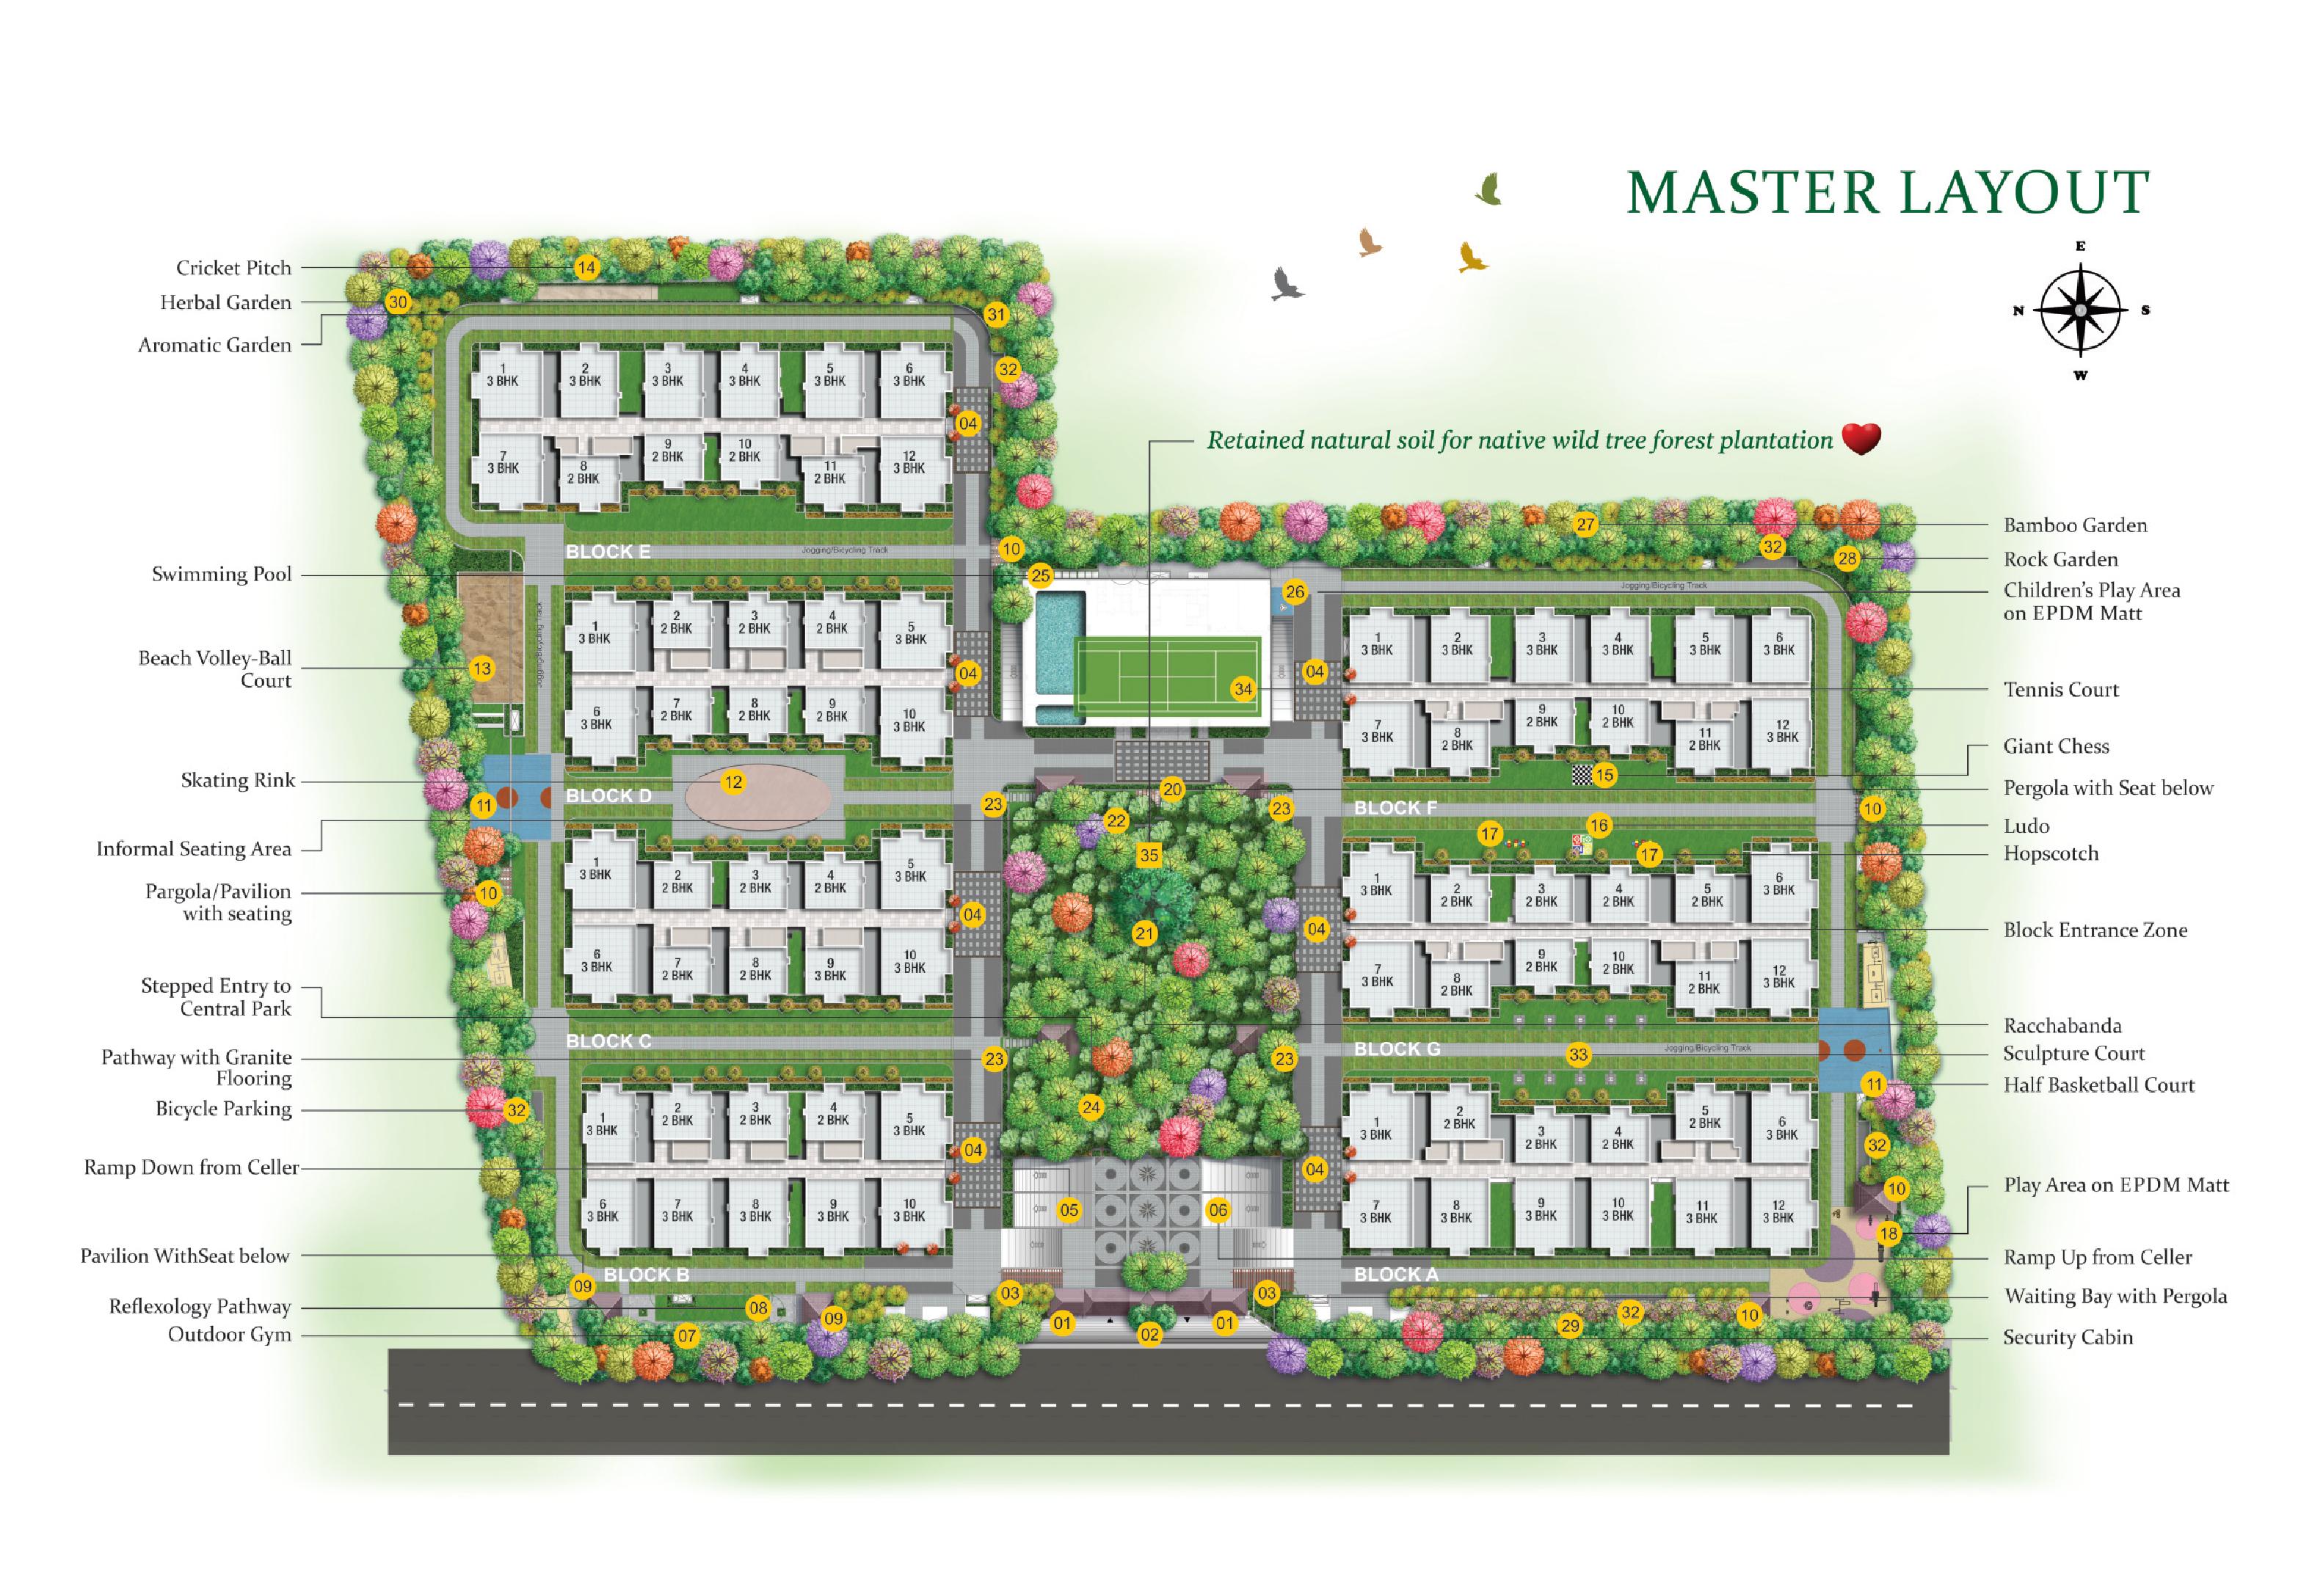 Master layout of Greenmark Mayfair Apartments in Hyderabad